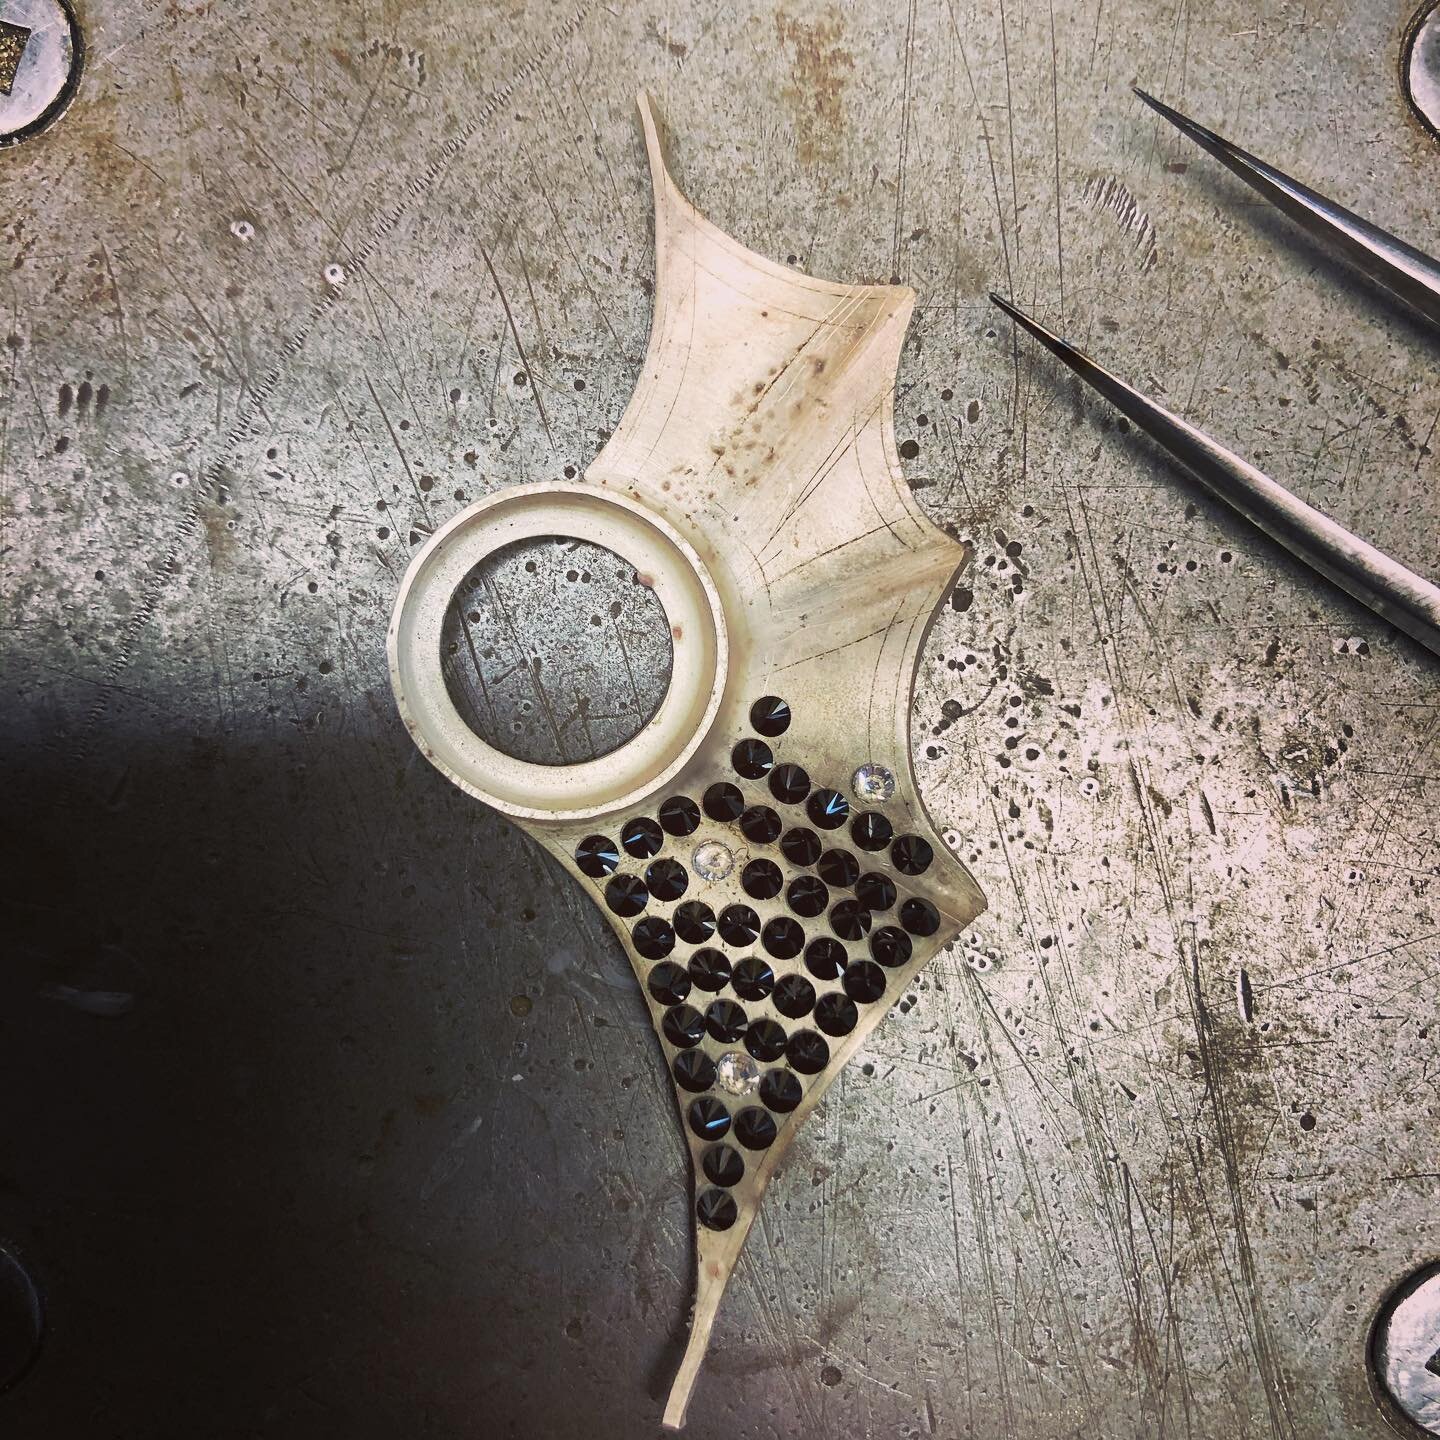 Pav&eacute; bat wing in progress... planning out stone placement. Good thing I love a good puzzle. #jewelry #jewellery #stonesetting #metalsmithsociety #metalsmithing #handmadejewelry #sisterhoodofmetalsmiths #etsymetal #etsymetalteam #pave